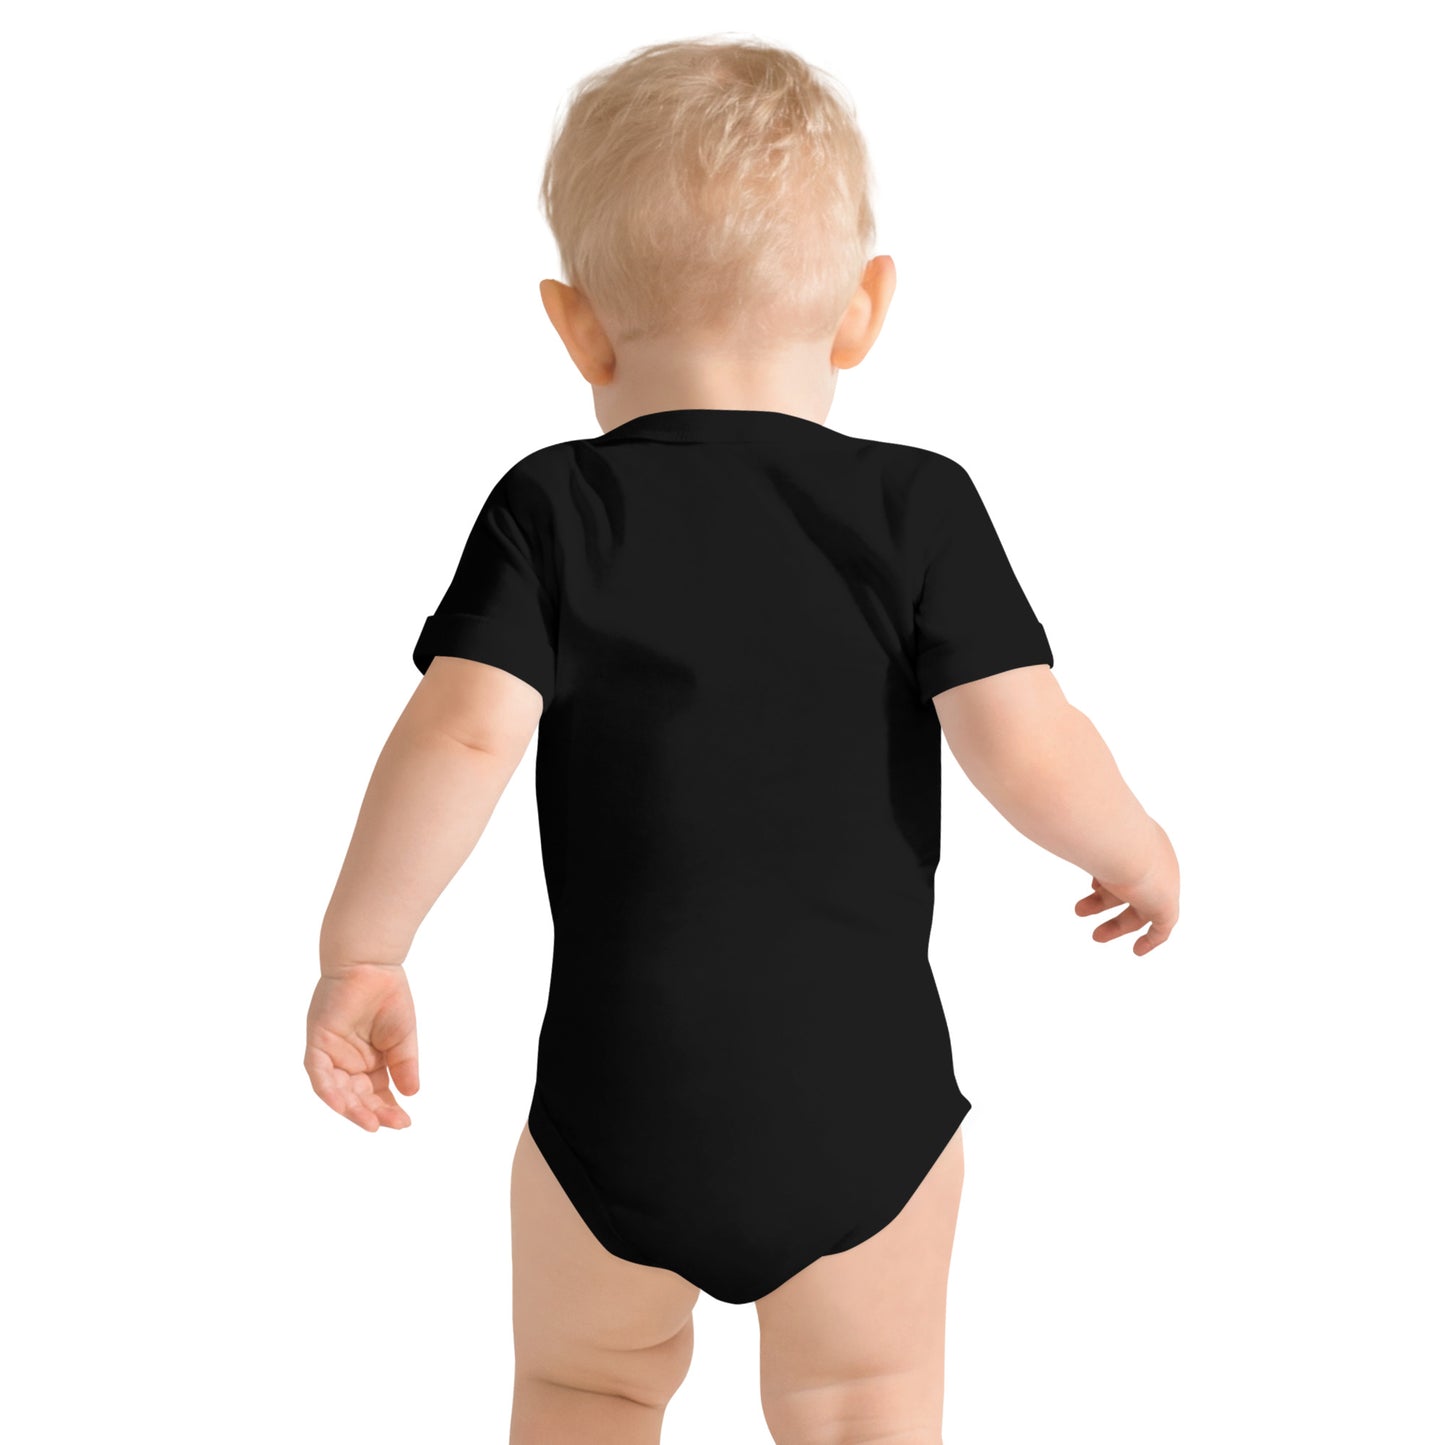 Be the light Baby short sleeve one piece